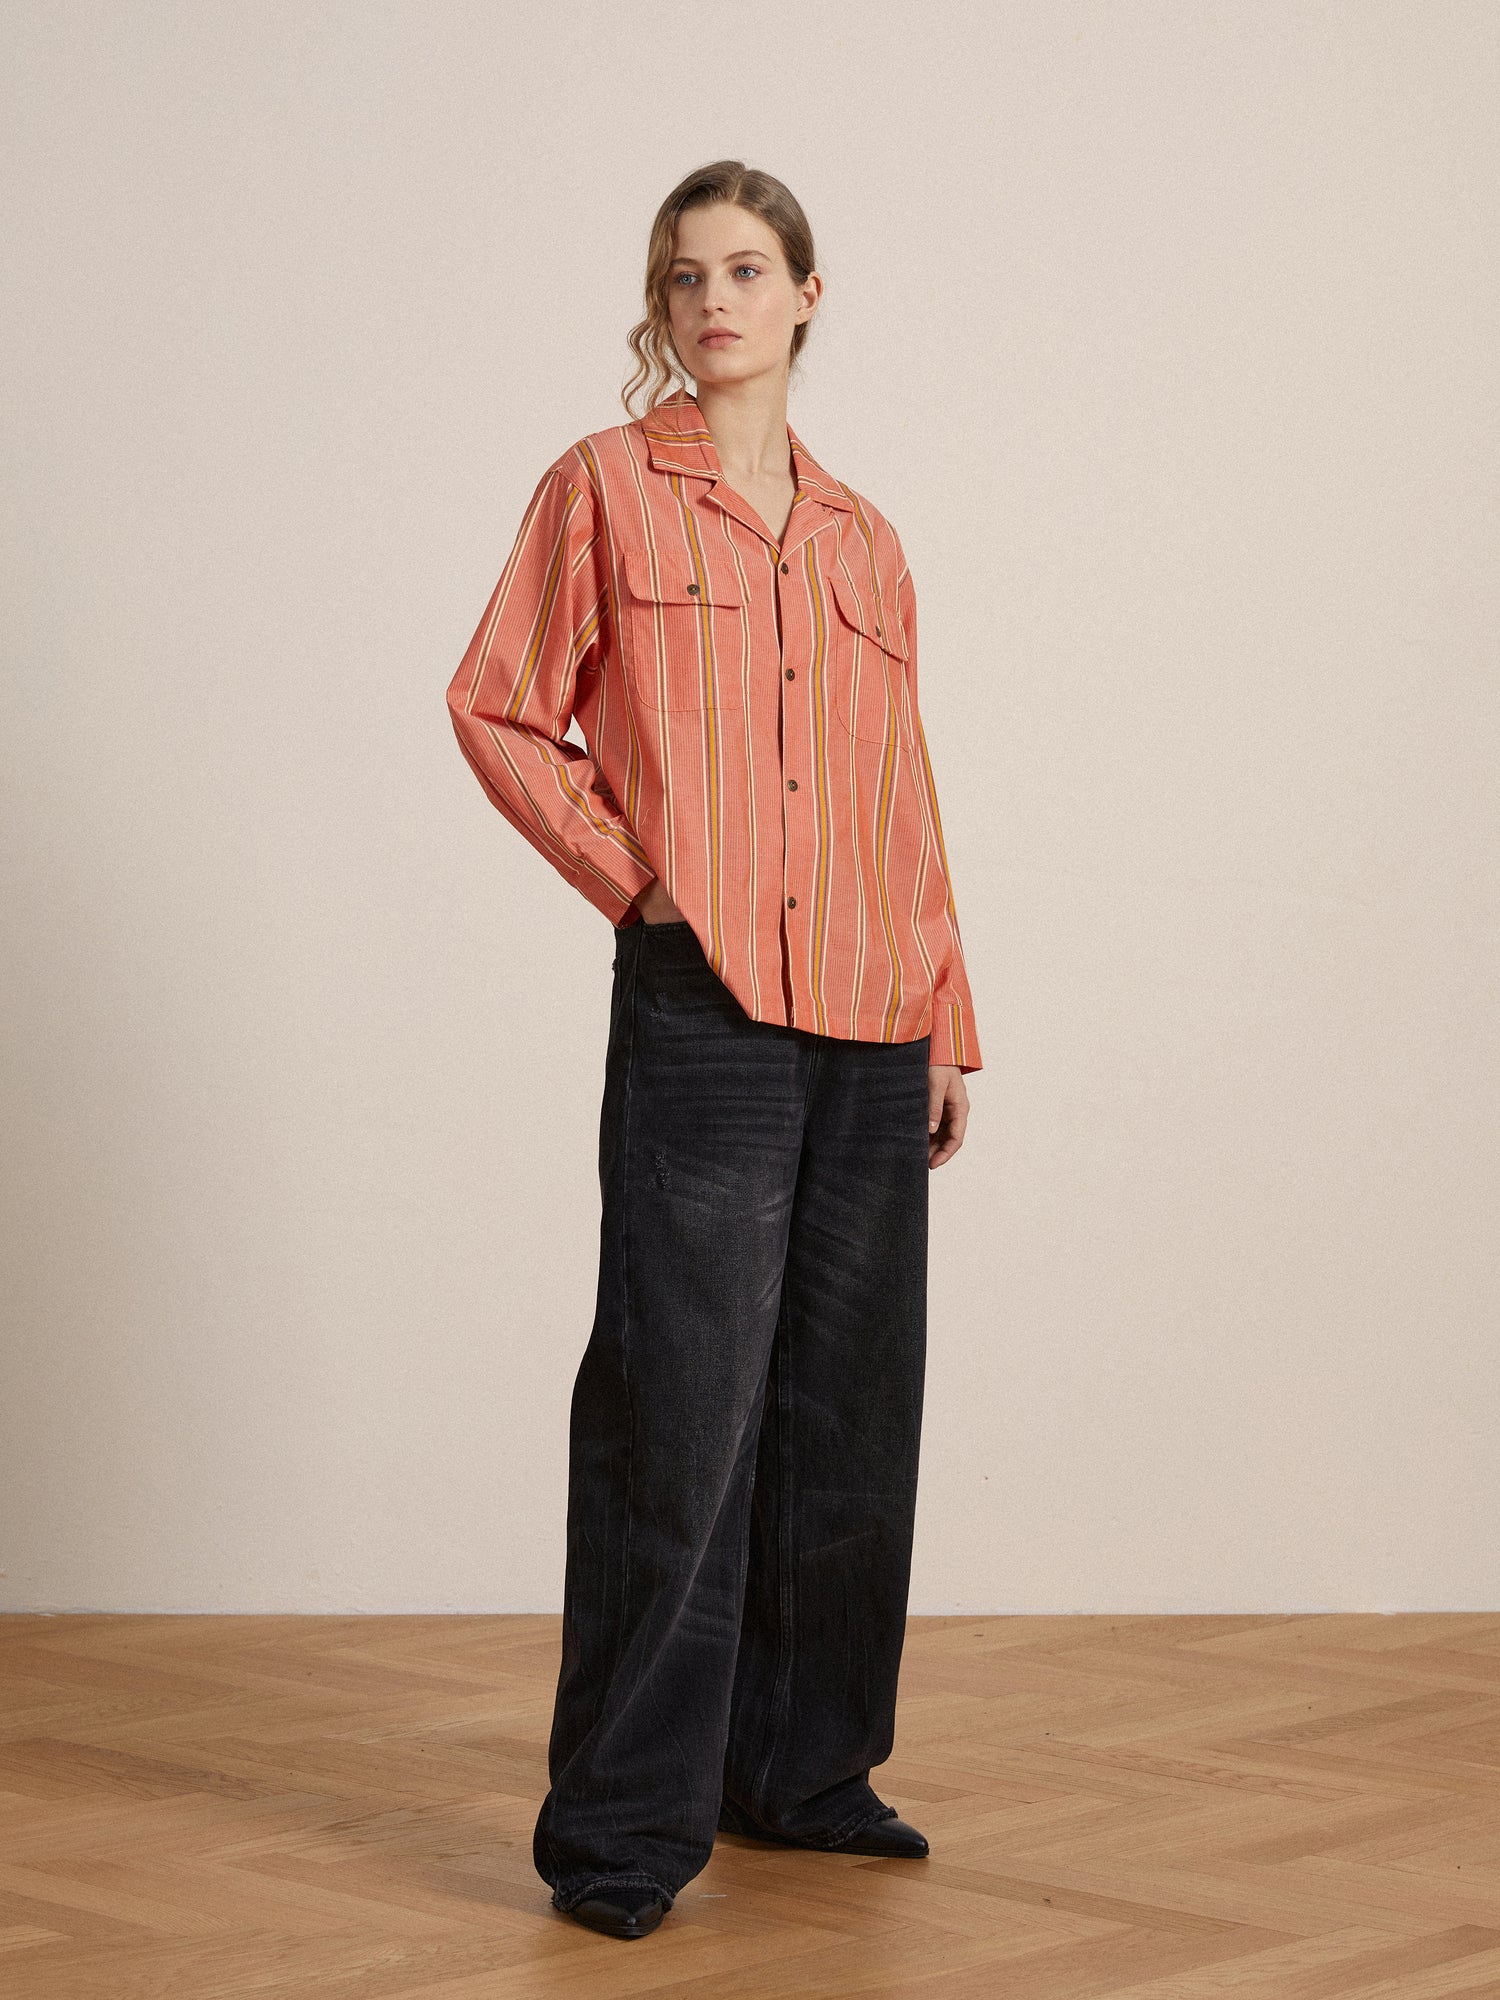 A model wearing a Found Stripe Citrus LS Camp Shirt and wide leg pants, both exuding timeless silhouette and classic appeal.